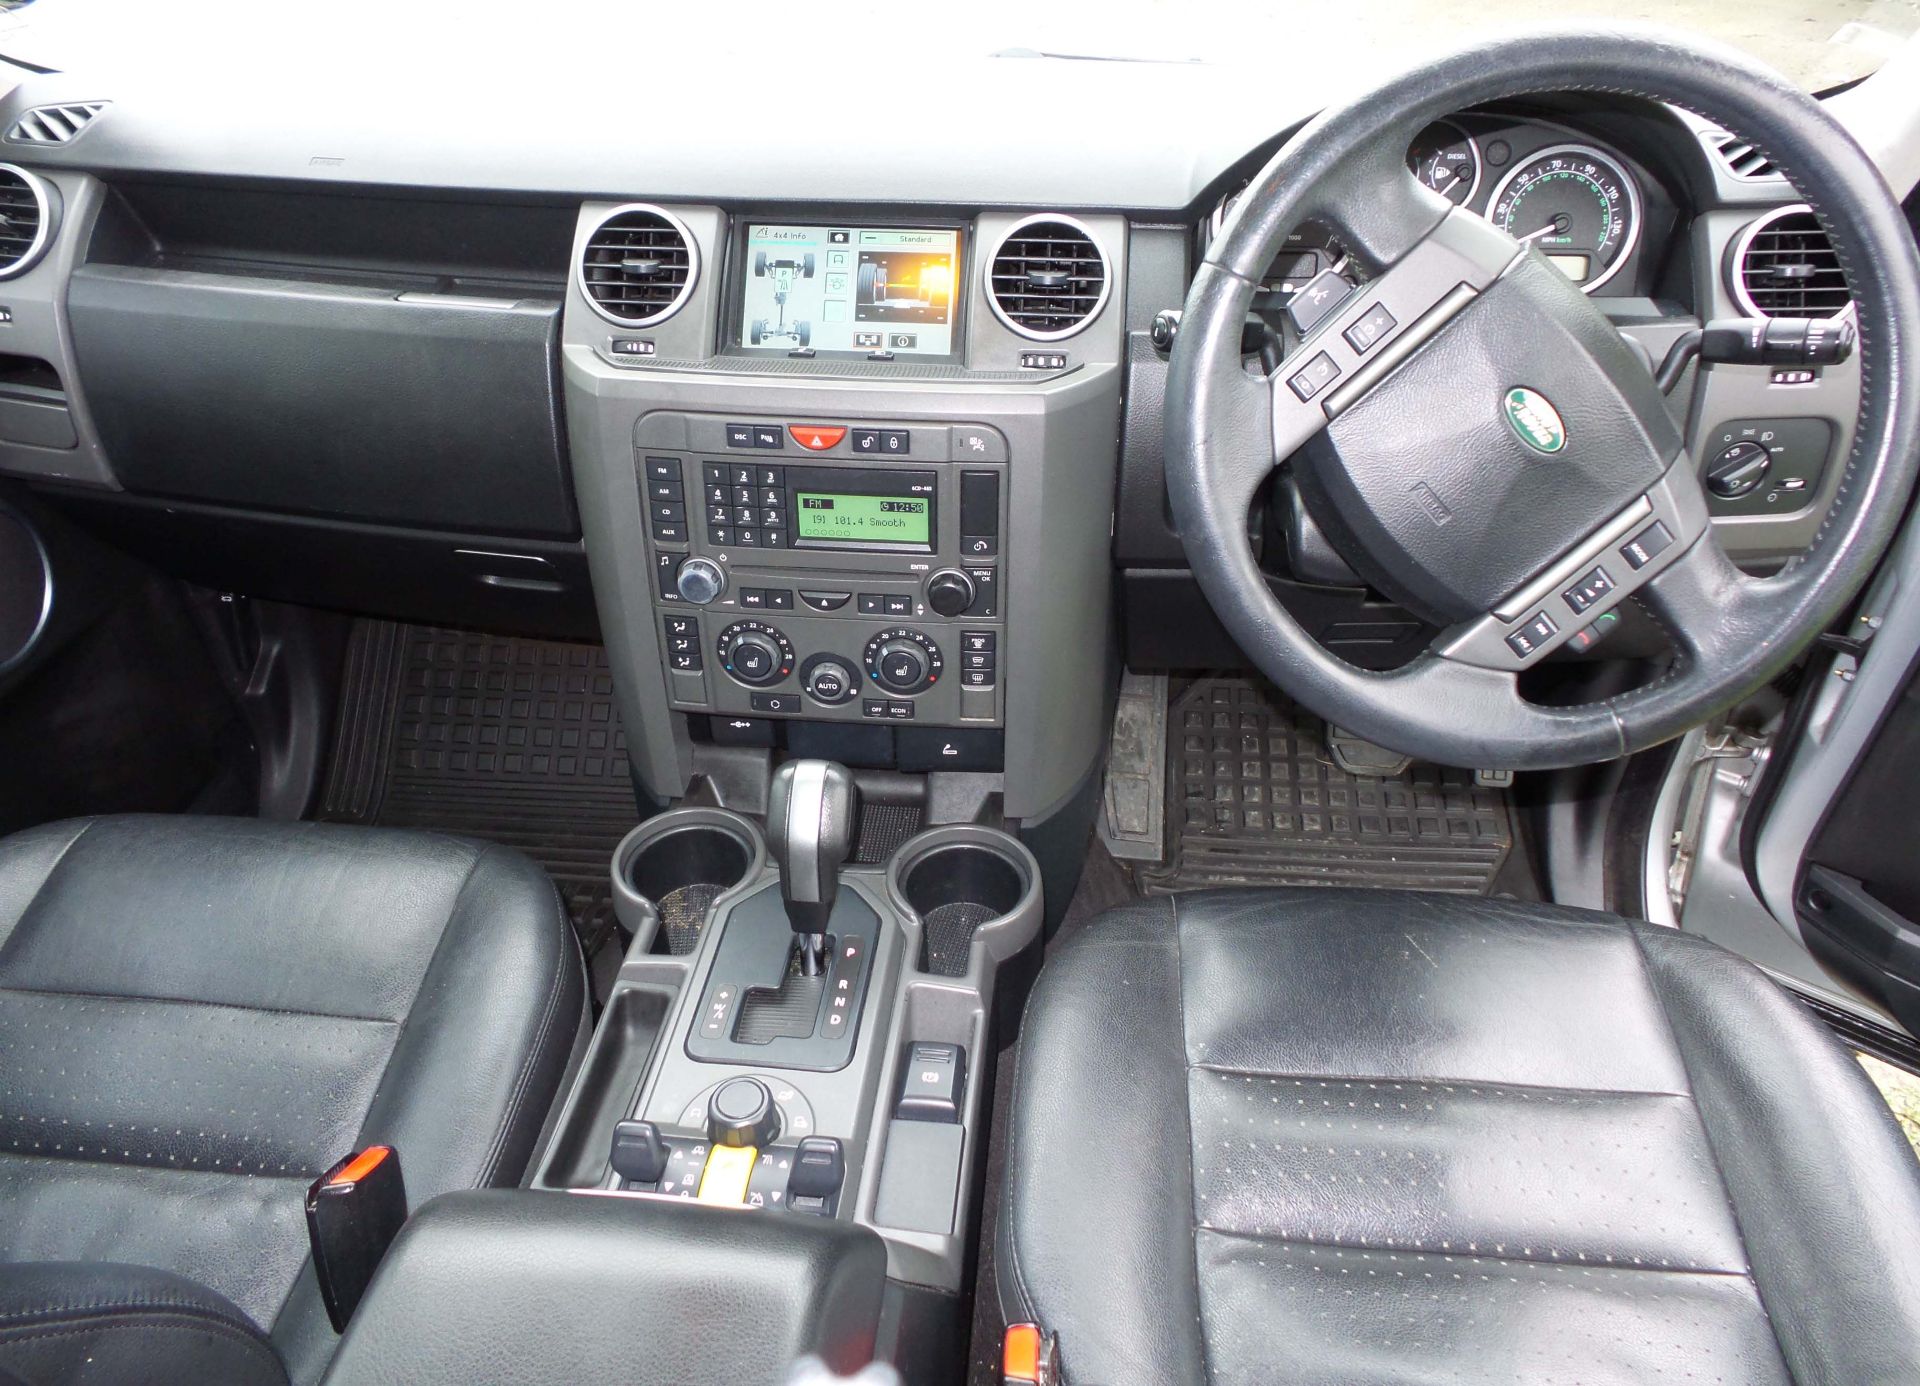 2004 DISCOVERY 3 TDV6 HSE AUTO IN SILVER WITH BLACK LEATHER,TOTAL HSE SPEC.

Black Full leather - Image 2 of 6